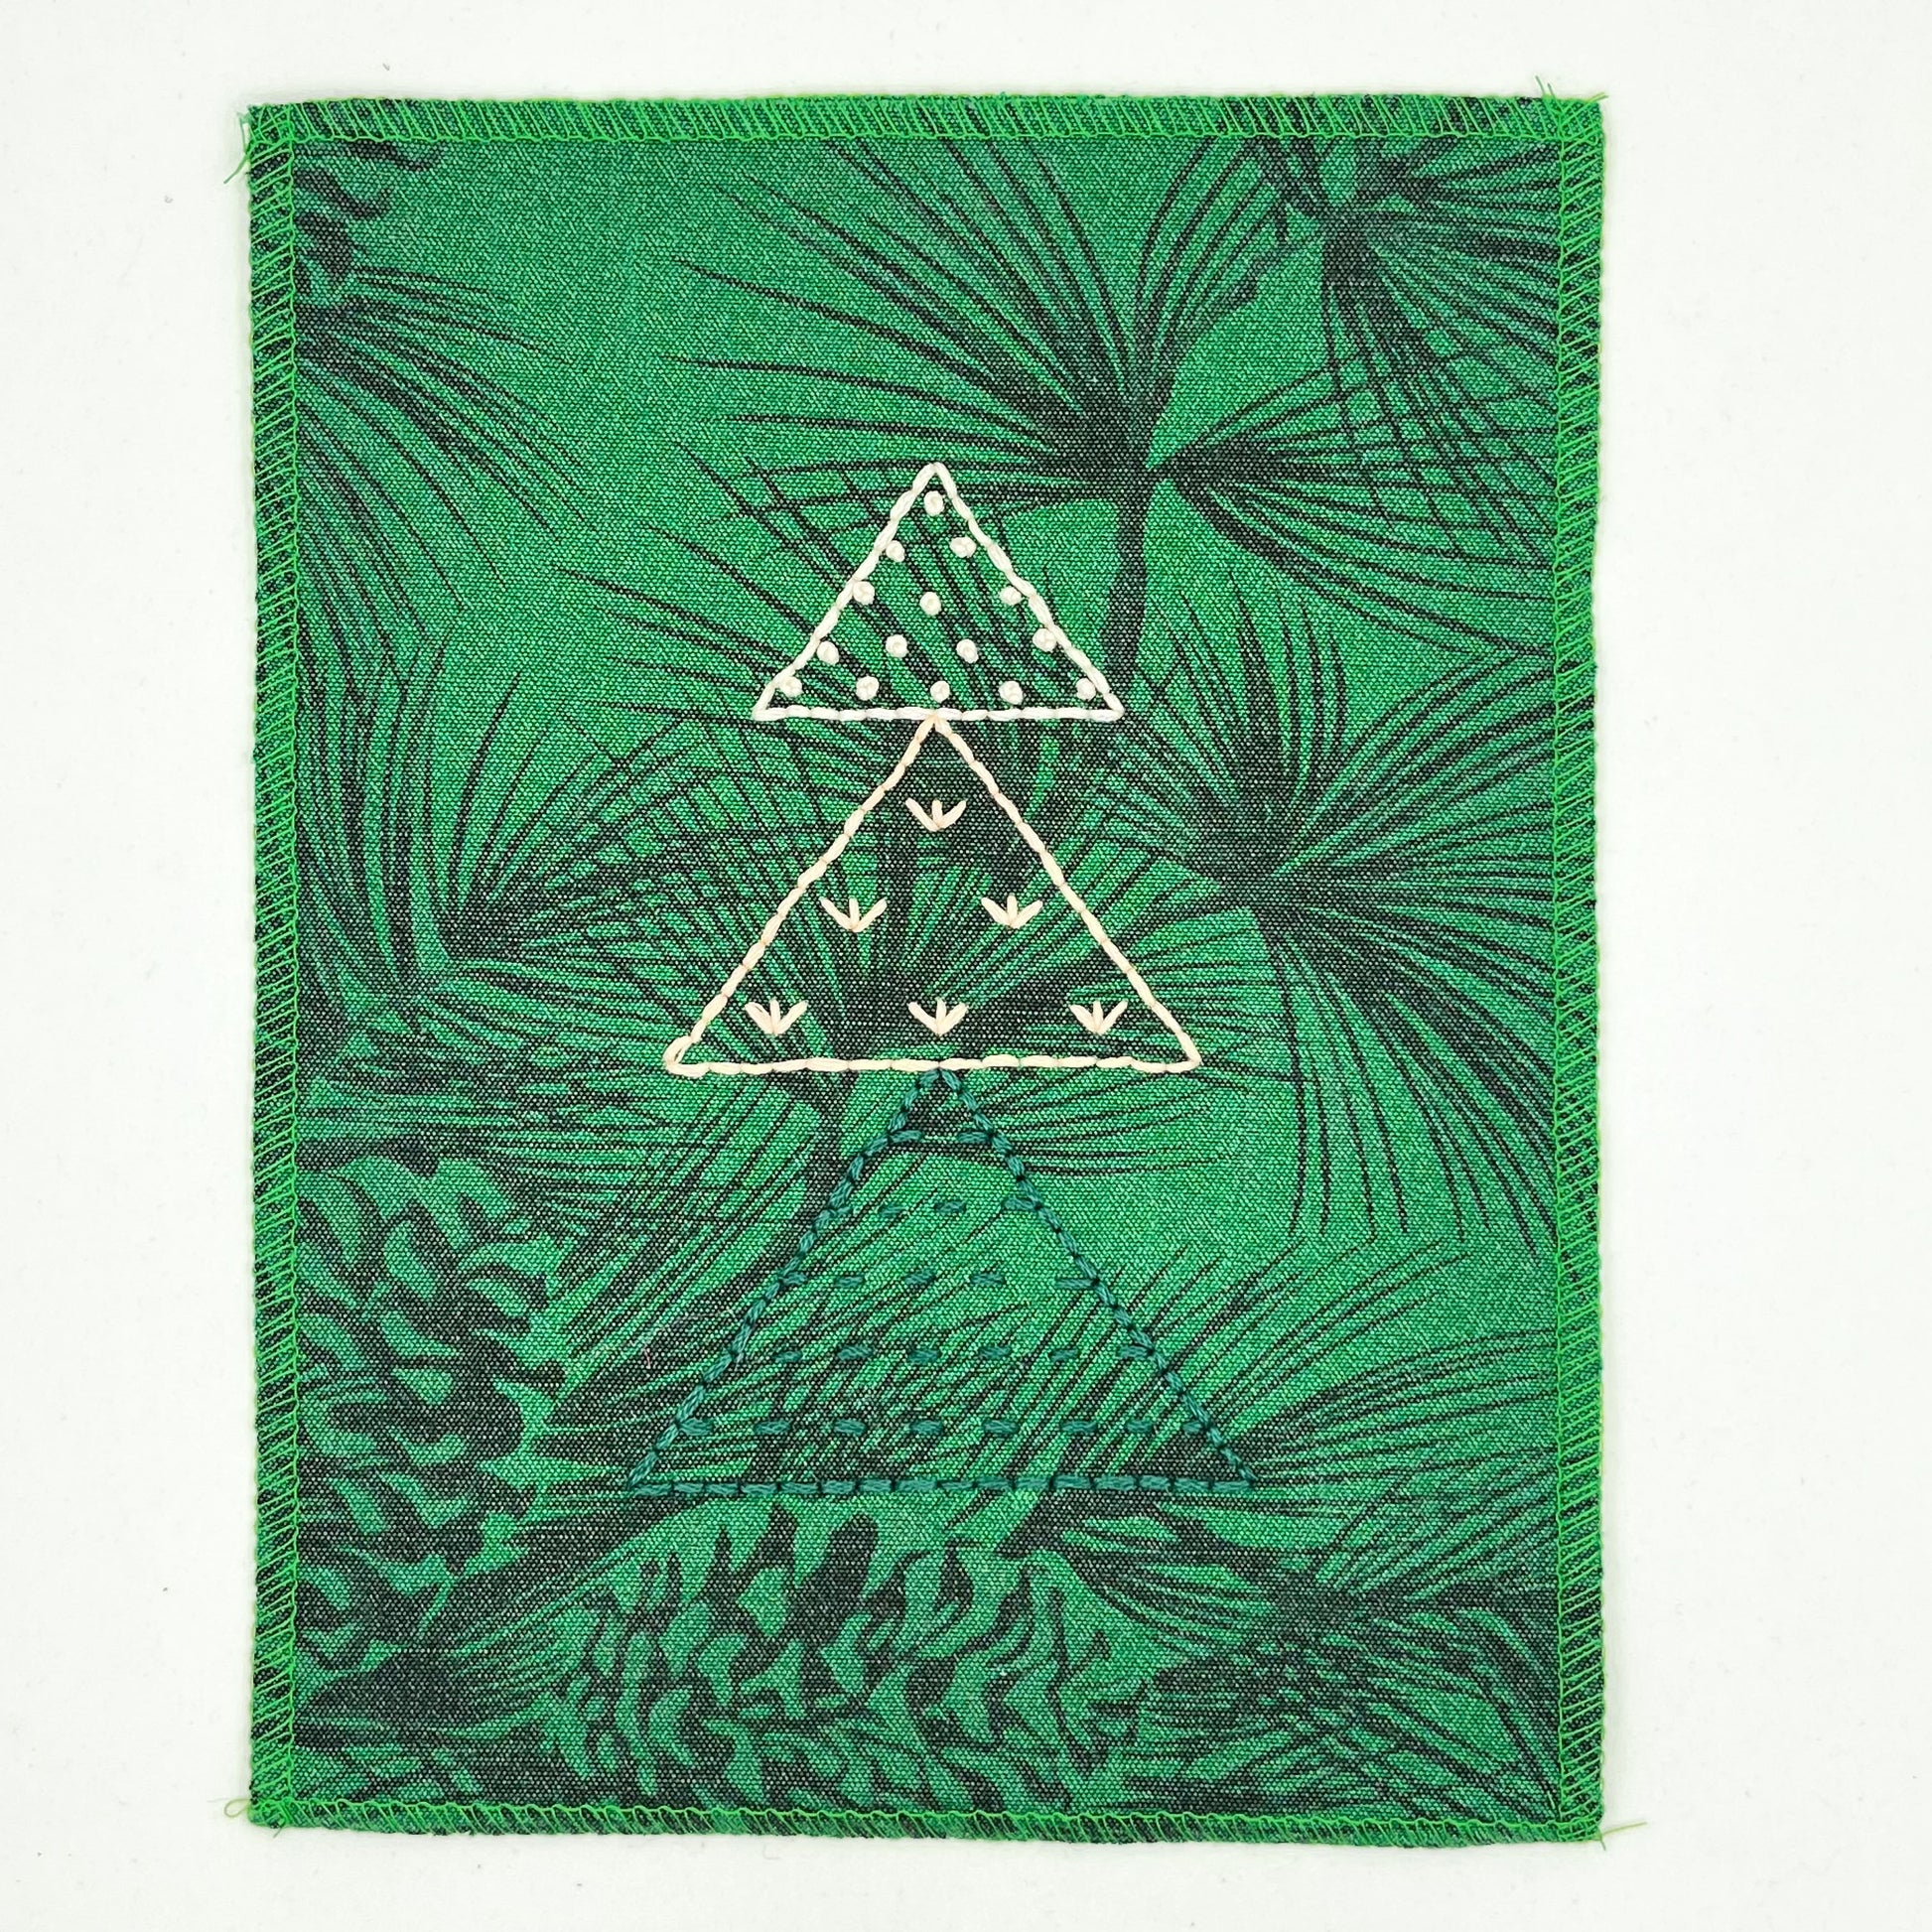 a fabric wall hanging made from bright green fabric with pine branches printed on it, and stitched over with Christmas trees made from three triangles, each triangle filled with different types of stitches in green peach and ivory